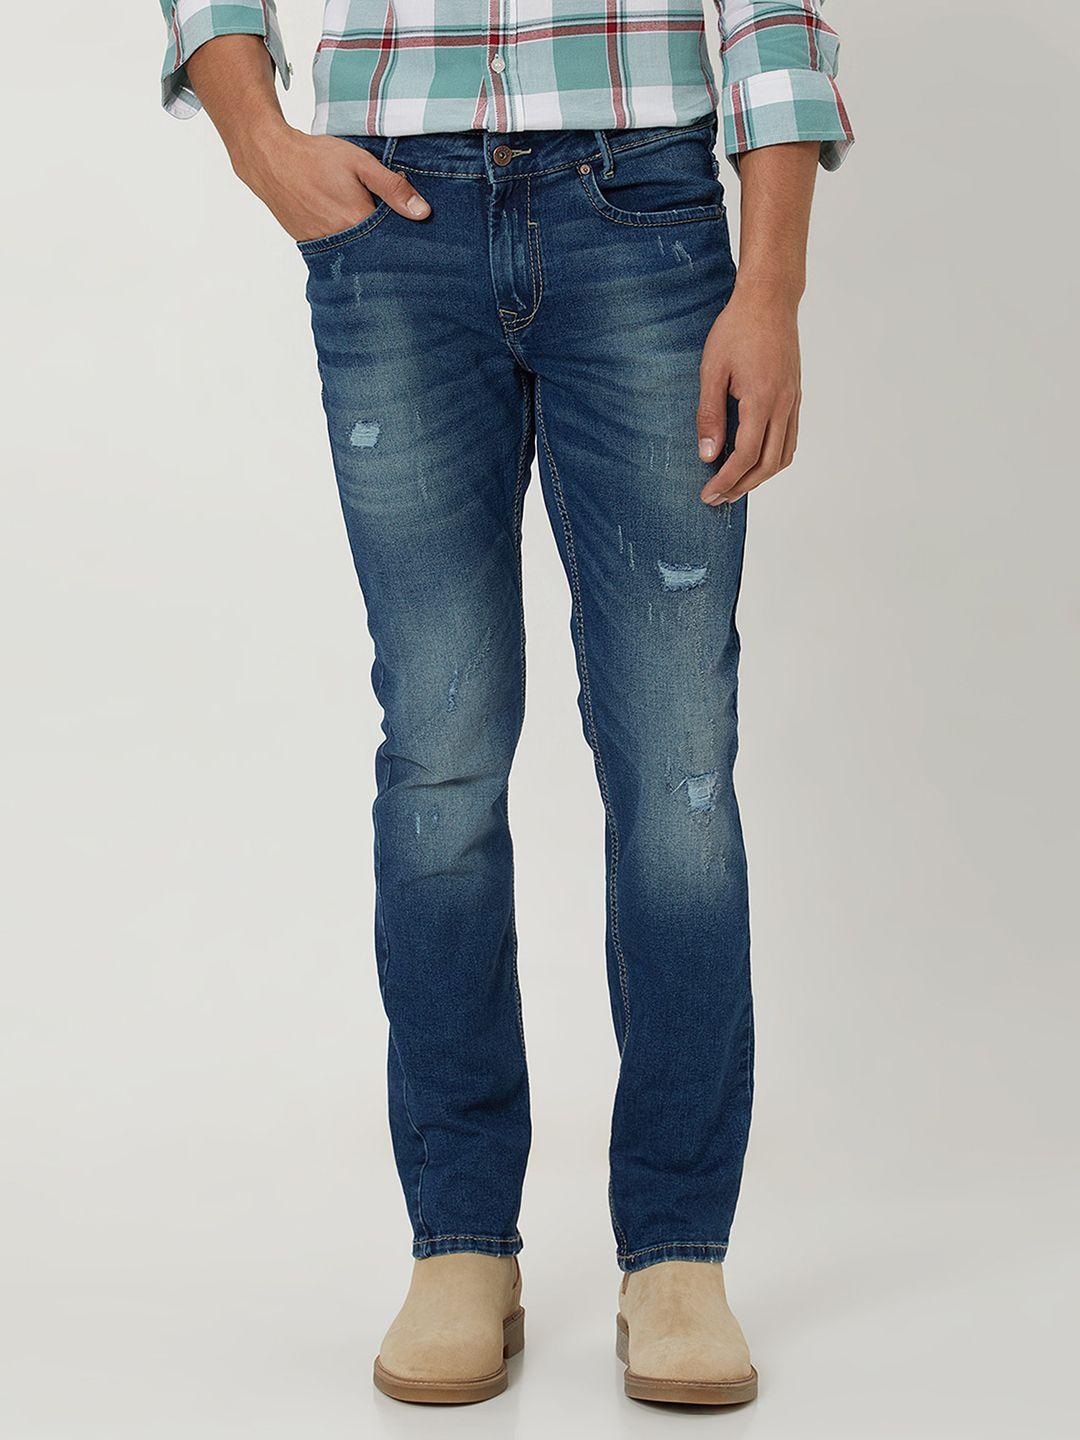 mufti-men-slim-fit-mid-rise-medium-shade-heavy-fade-low-distress-stretchable-jeans